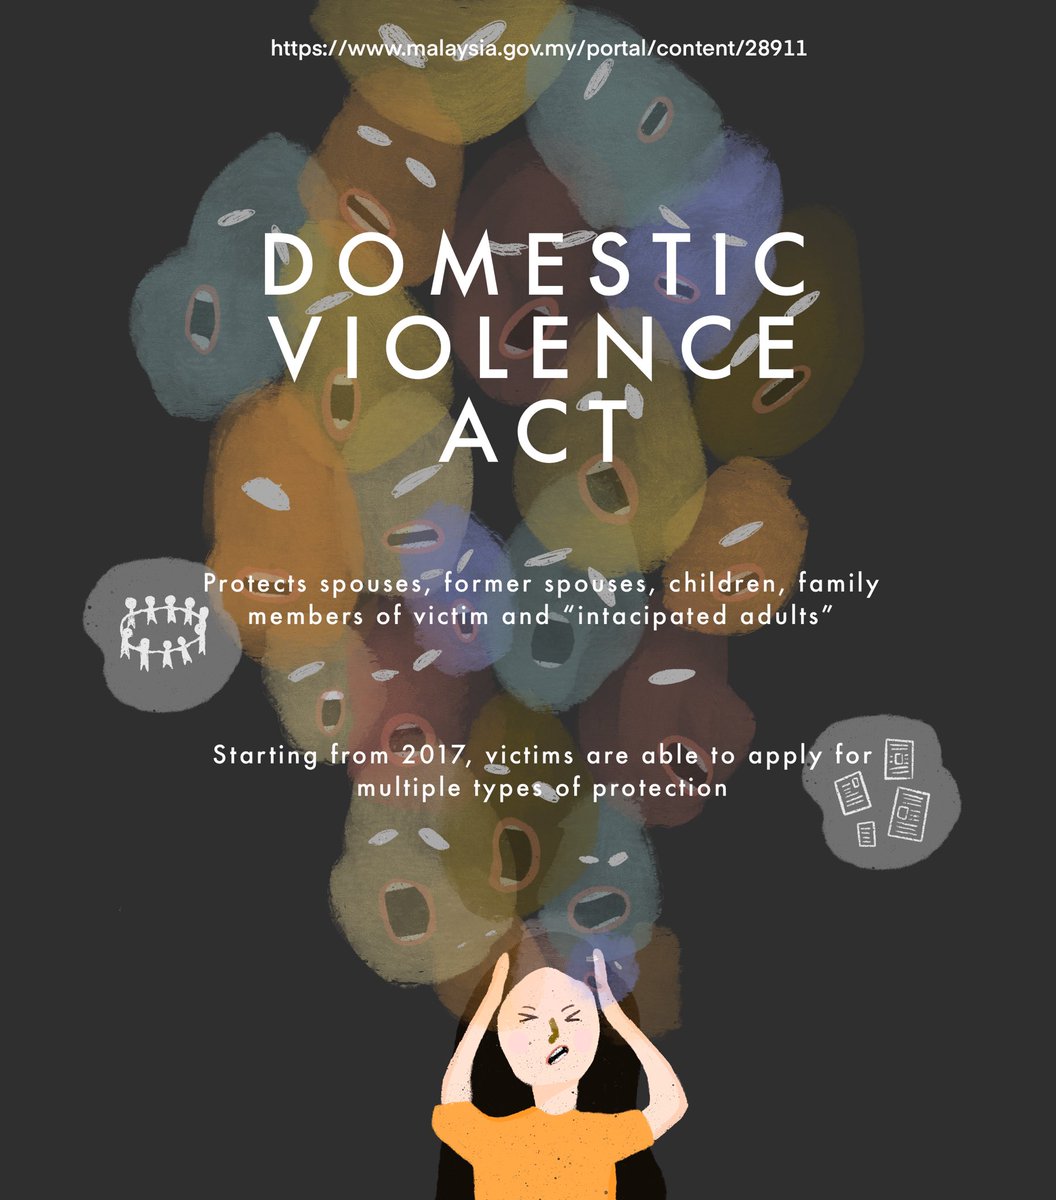 In accordance to the Domestic Violence Act amended in 2017, victims of abuse are able to apply for multiple types of protection which are meant to restrain the abuser from using domestic violence against the victim.